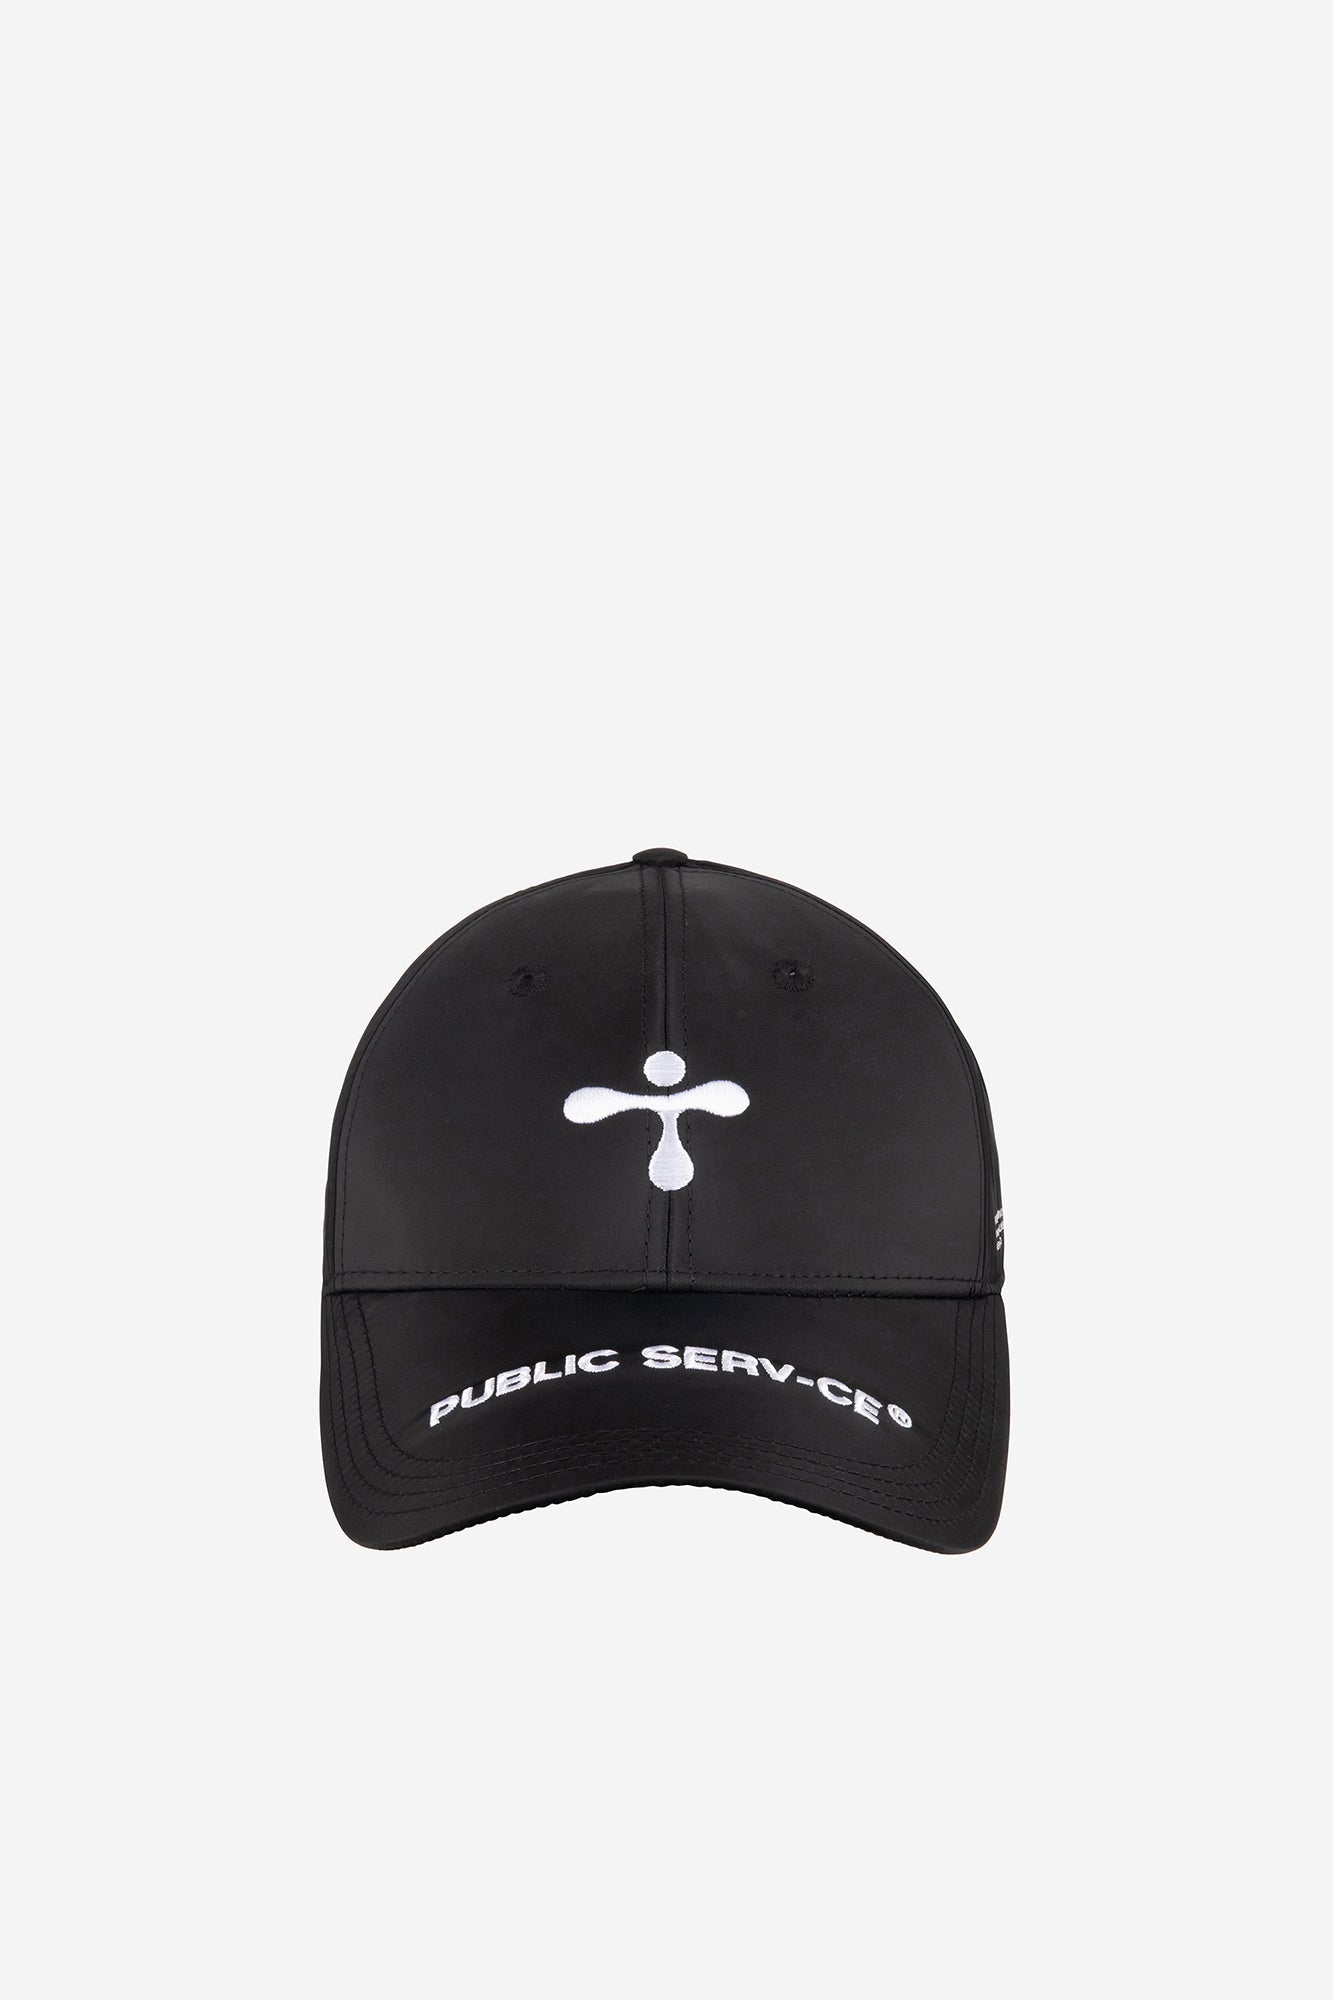 alt="close up of black cap with 3D stitching, elongated visor and contrast prints"